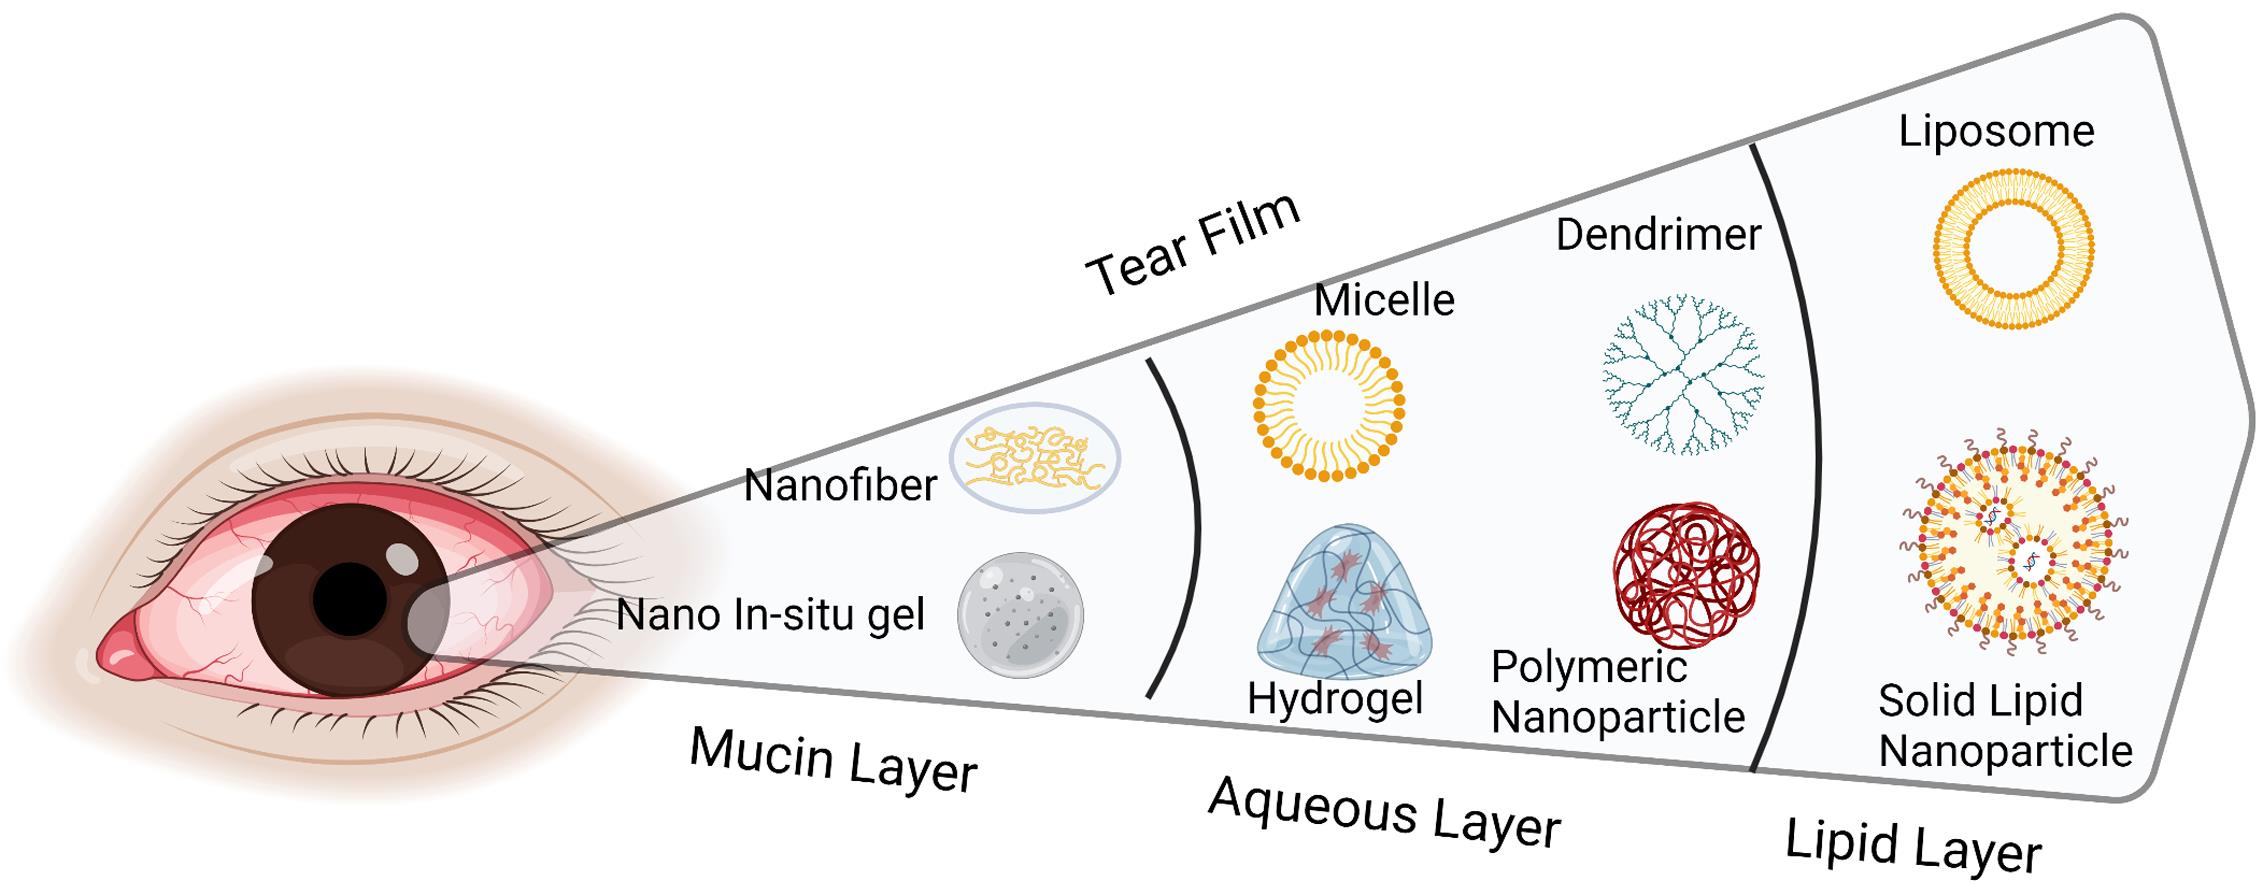 Different nanotechnology drug delivery systems applied to the three distinct layers of the tear film.